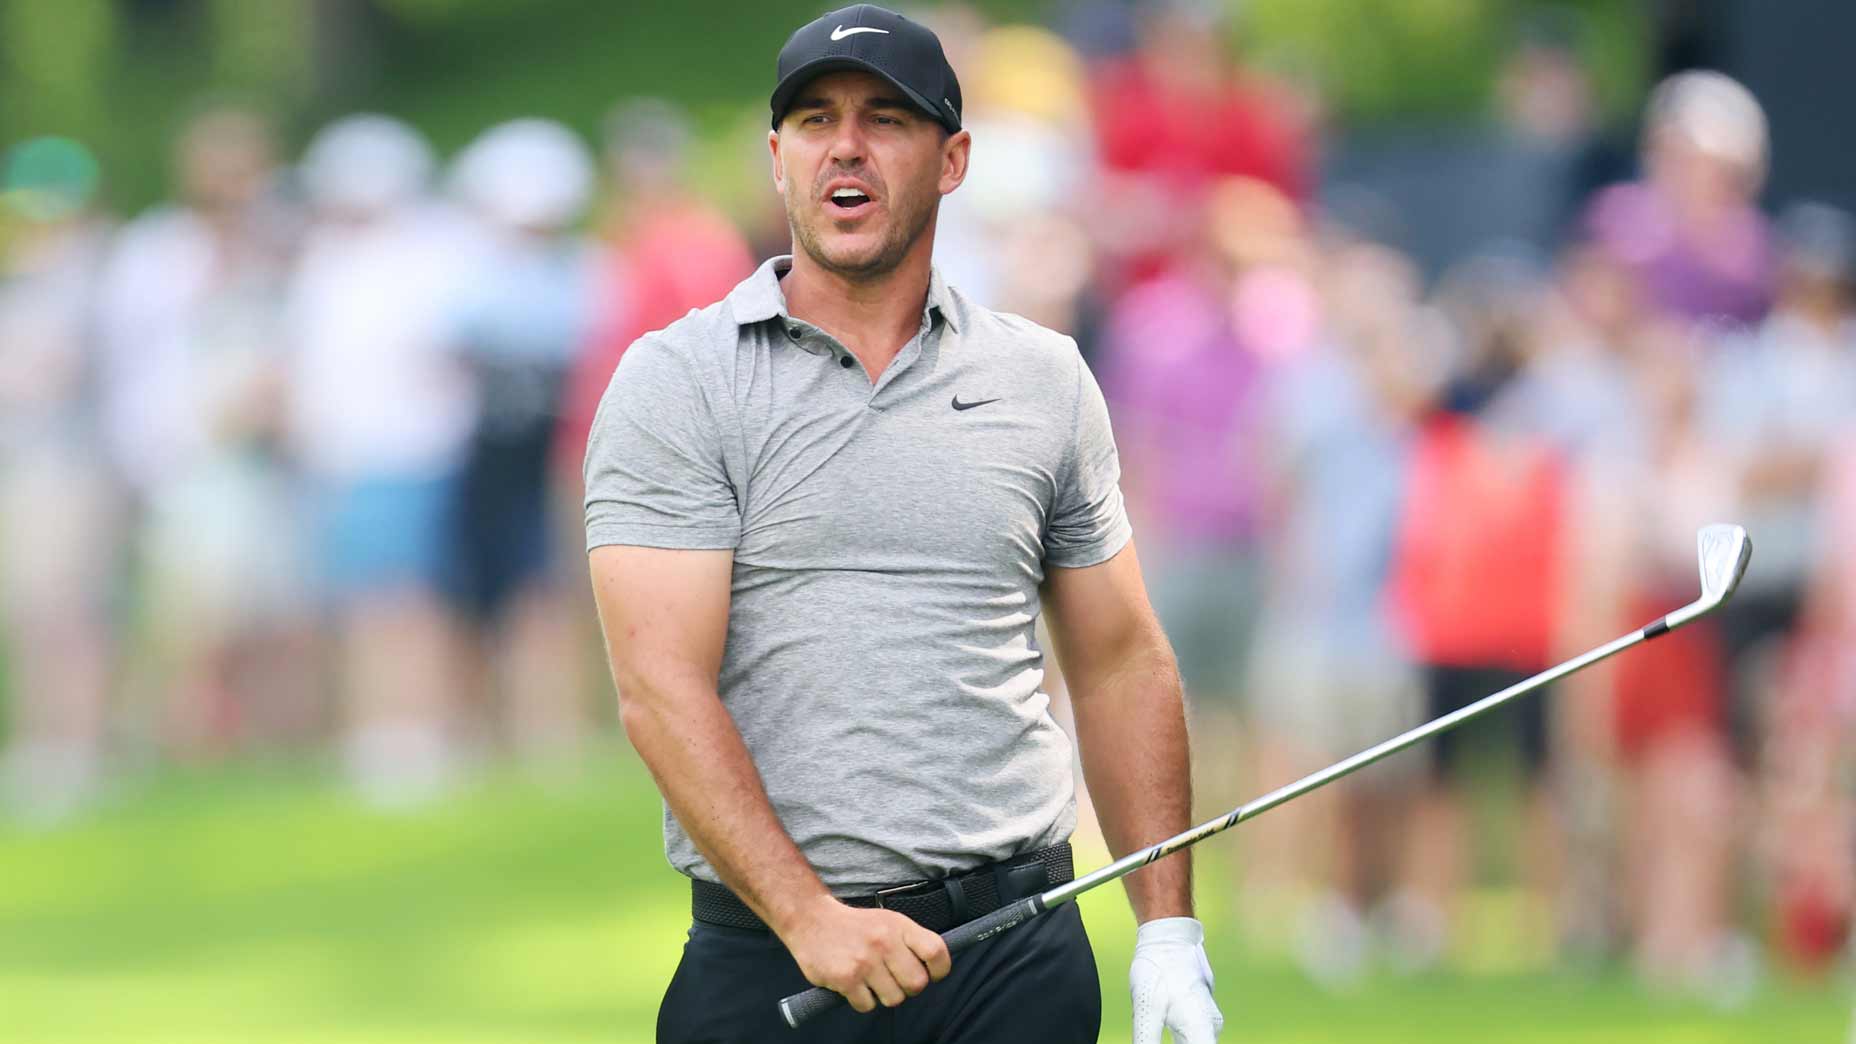 'I wanted to throw up': Brooks Koepka endured 'punishment' workouts after disappointing Masters